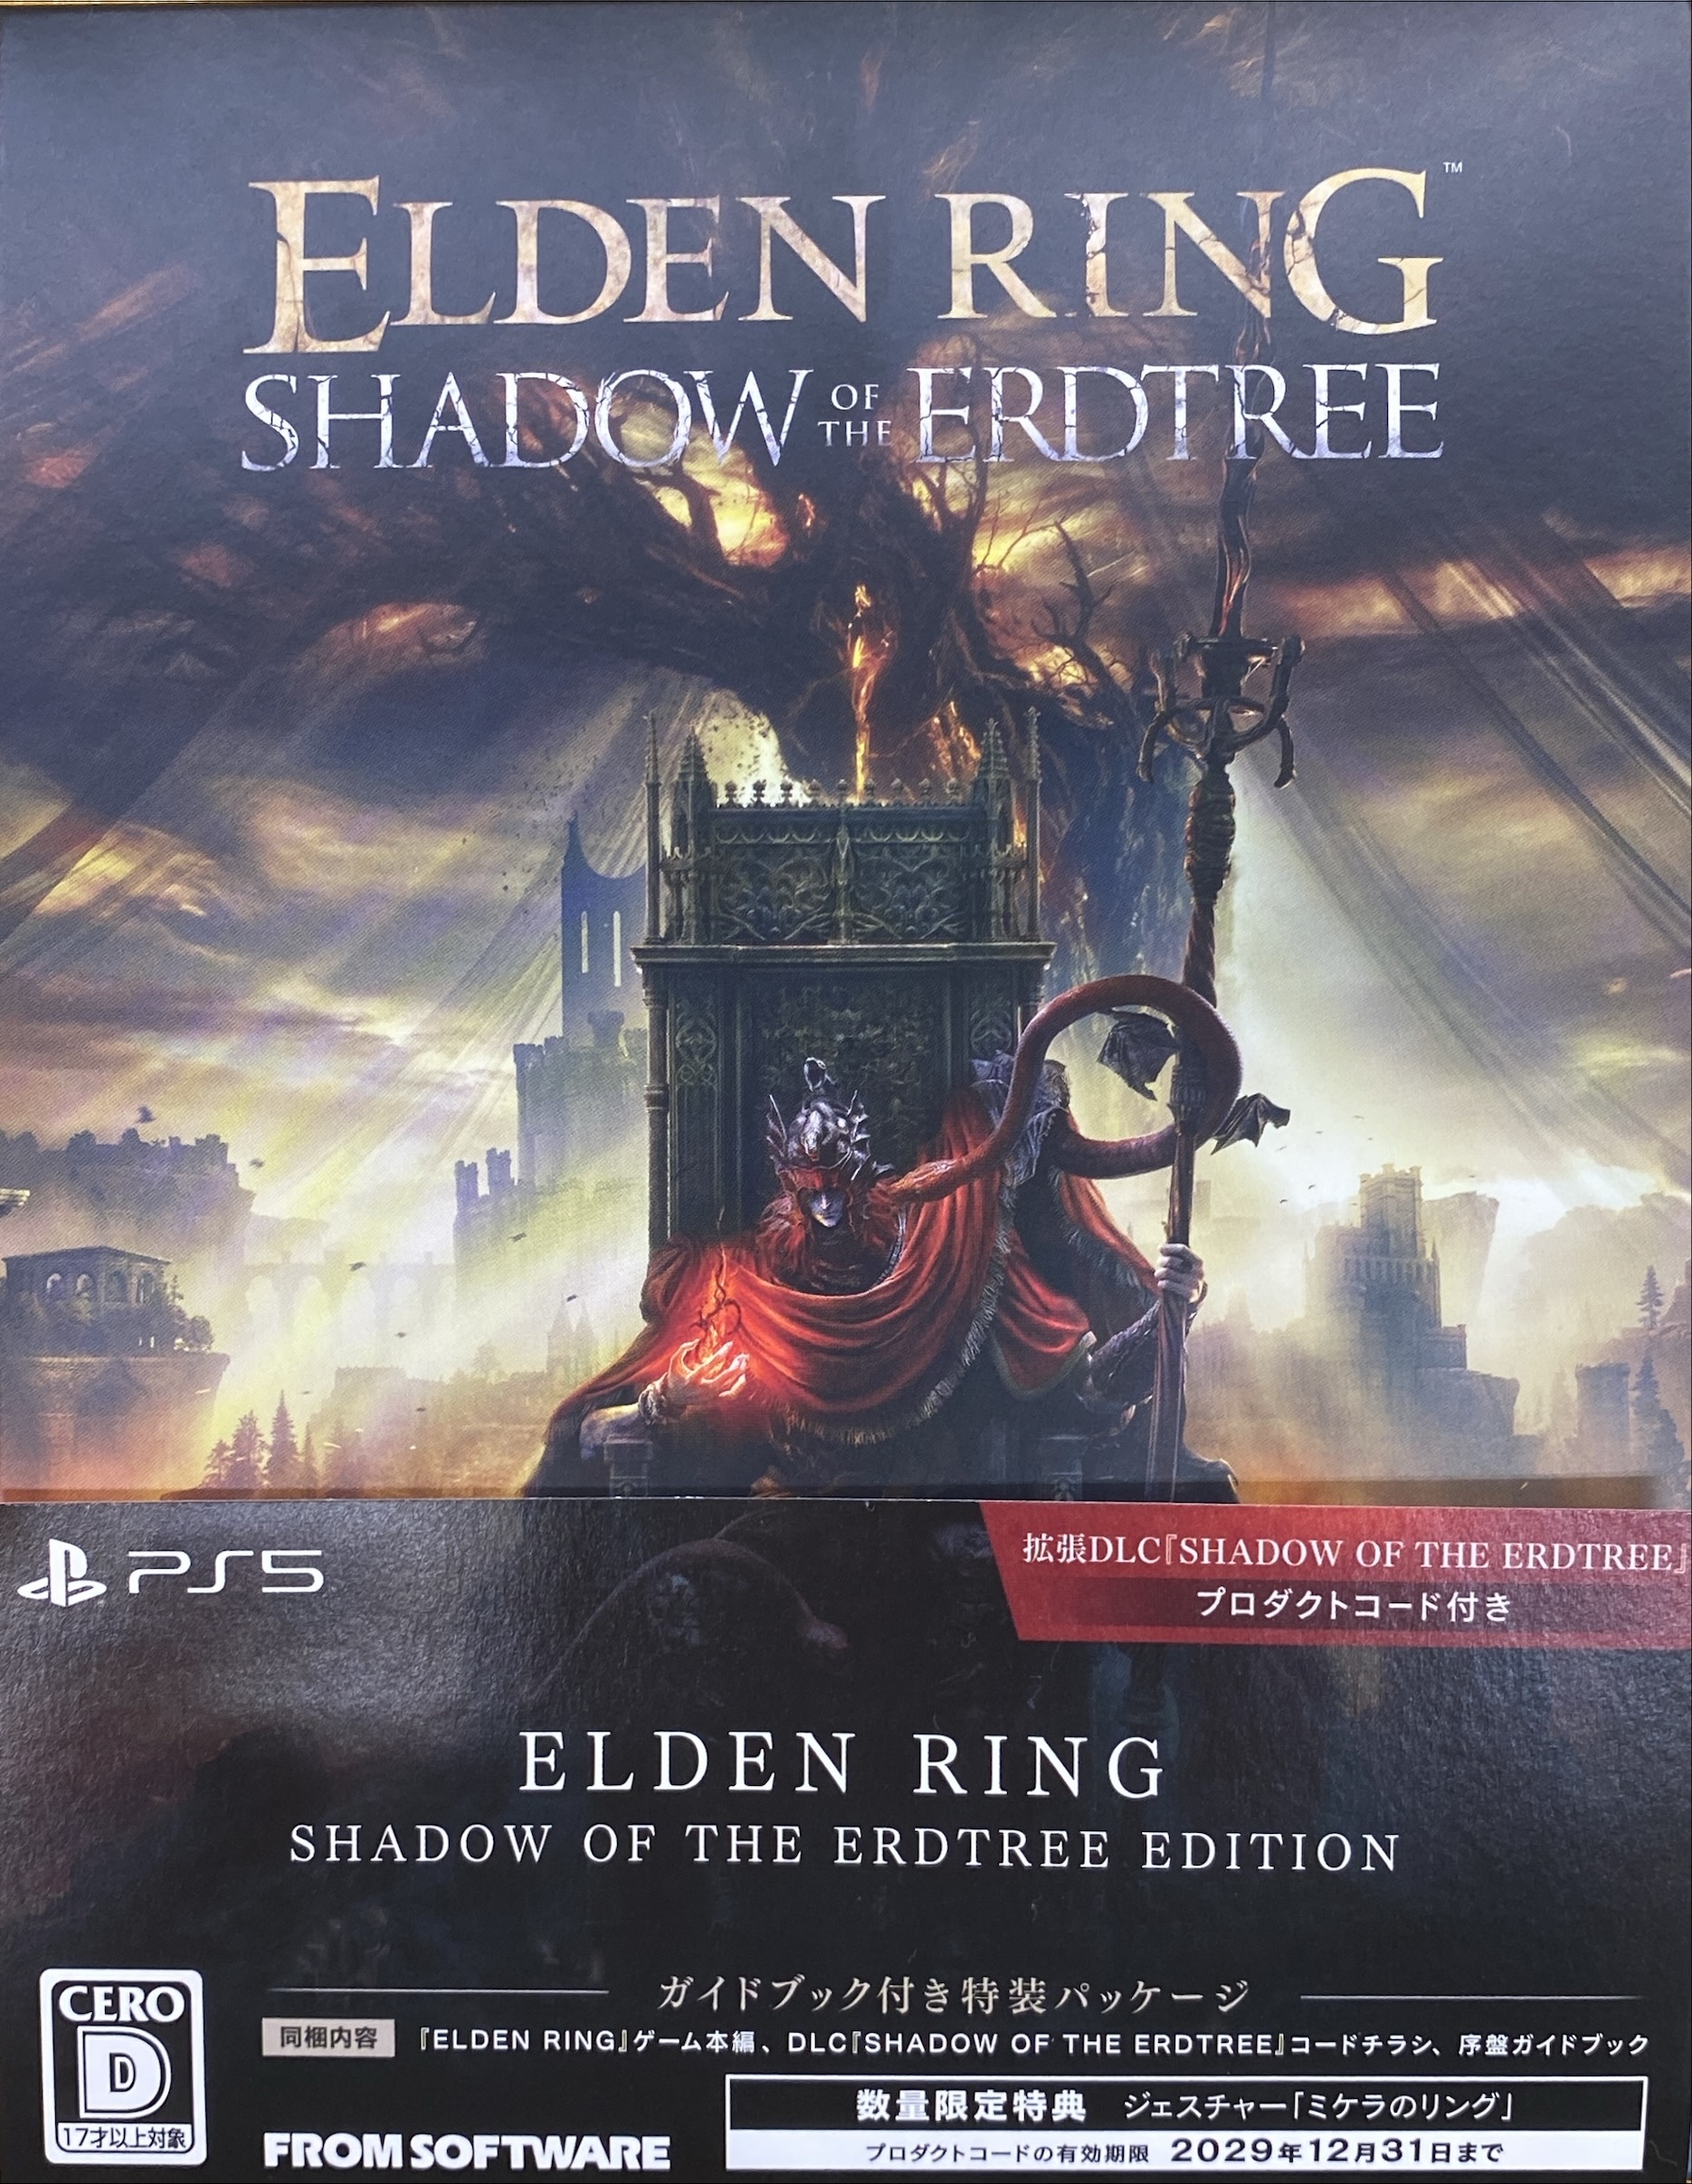 ELDEN RING SHADOW OF THE ERDTREE EDITION [通常版]